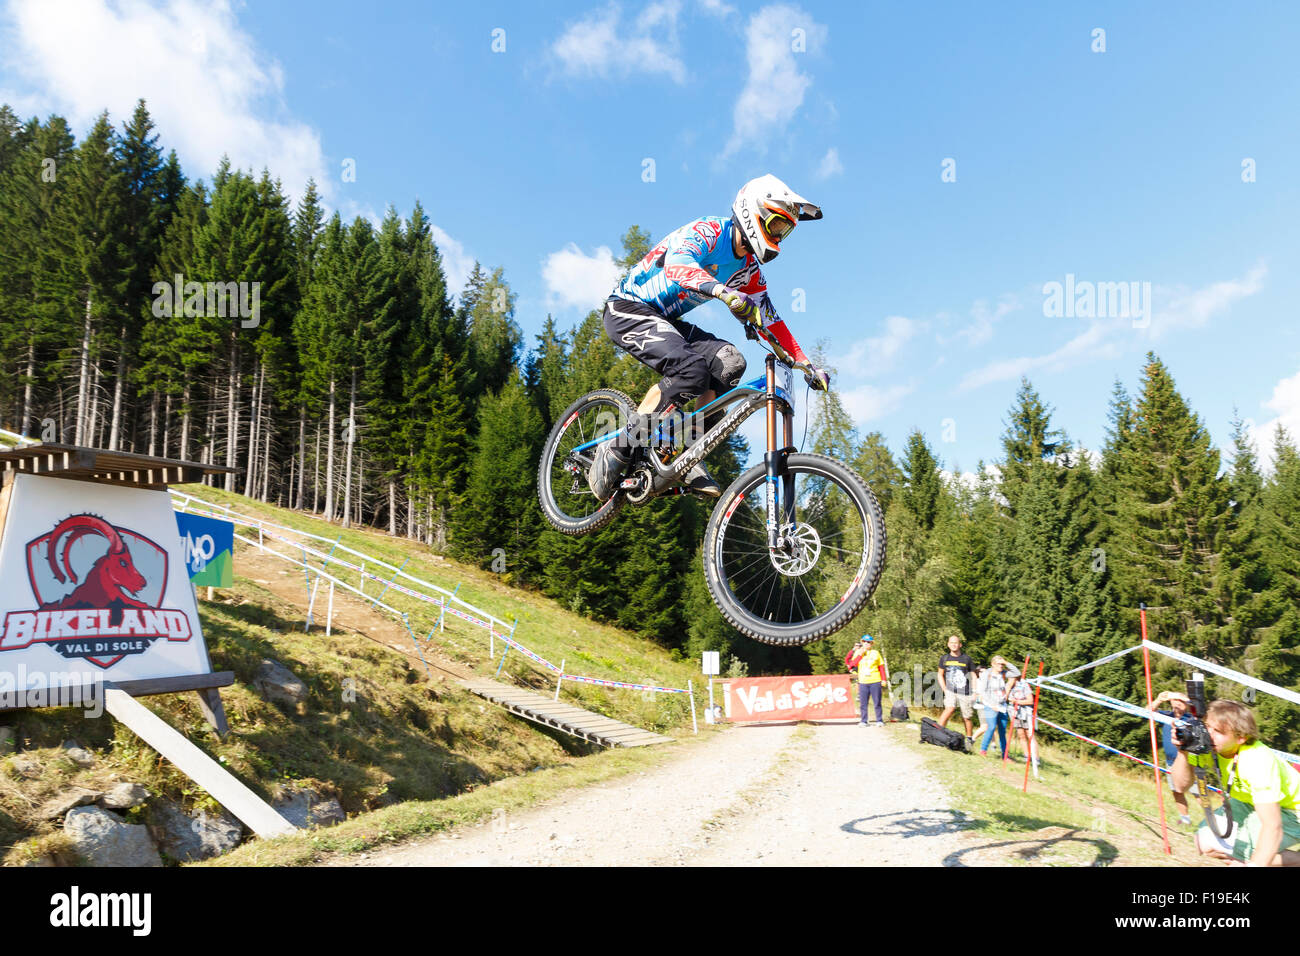 Val Di Sole, Italy - 22 August 2015: Ms Mondraker Team,  Rider Pekoll Markus in action during the mens elite Downhill final Stock Photo